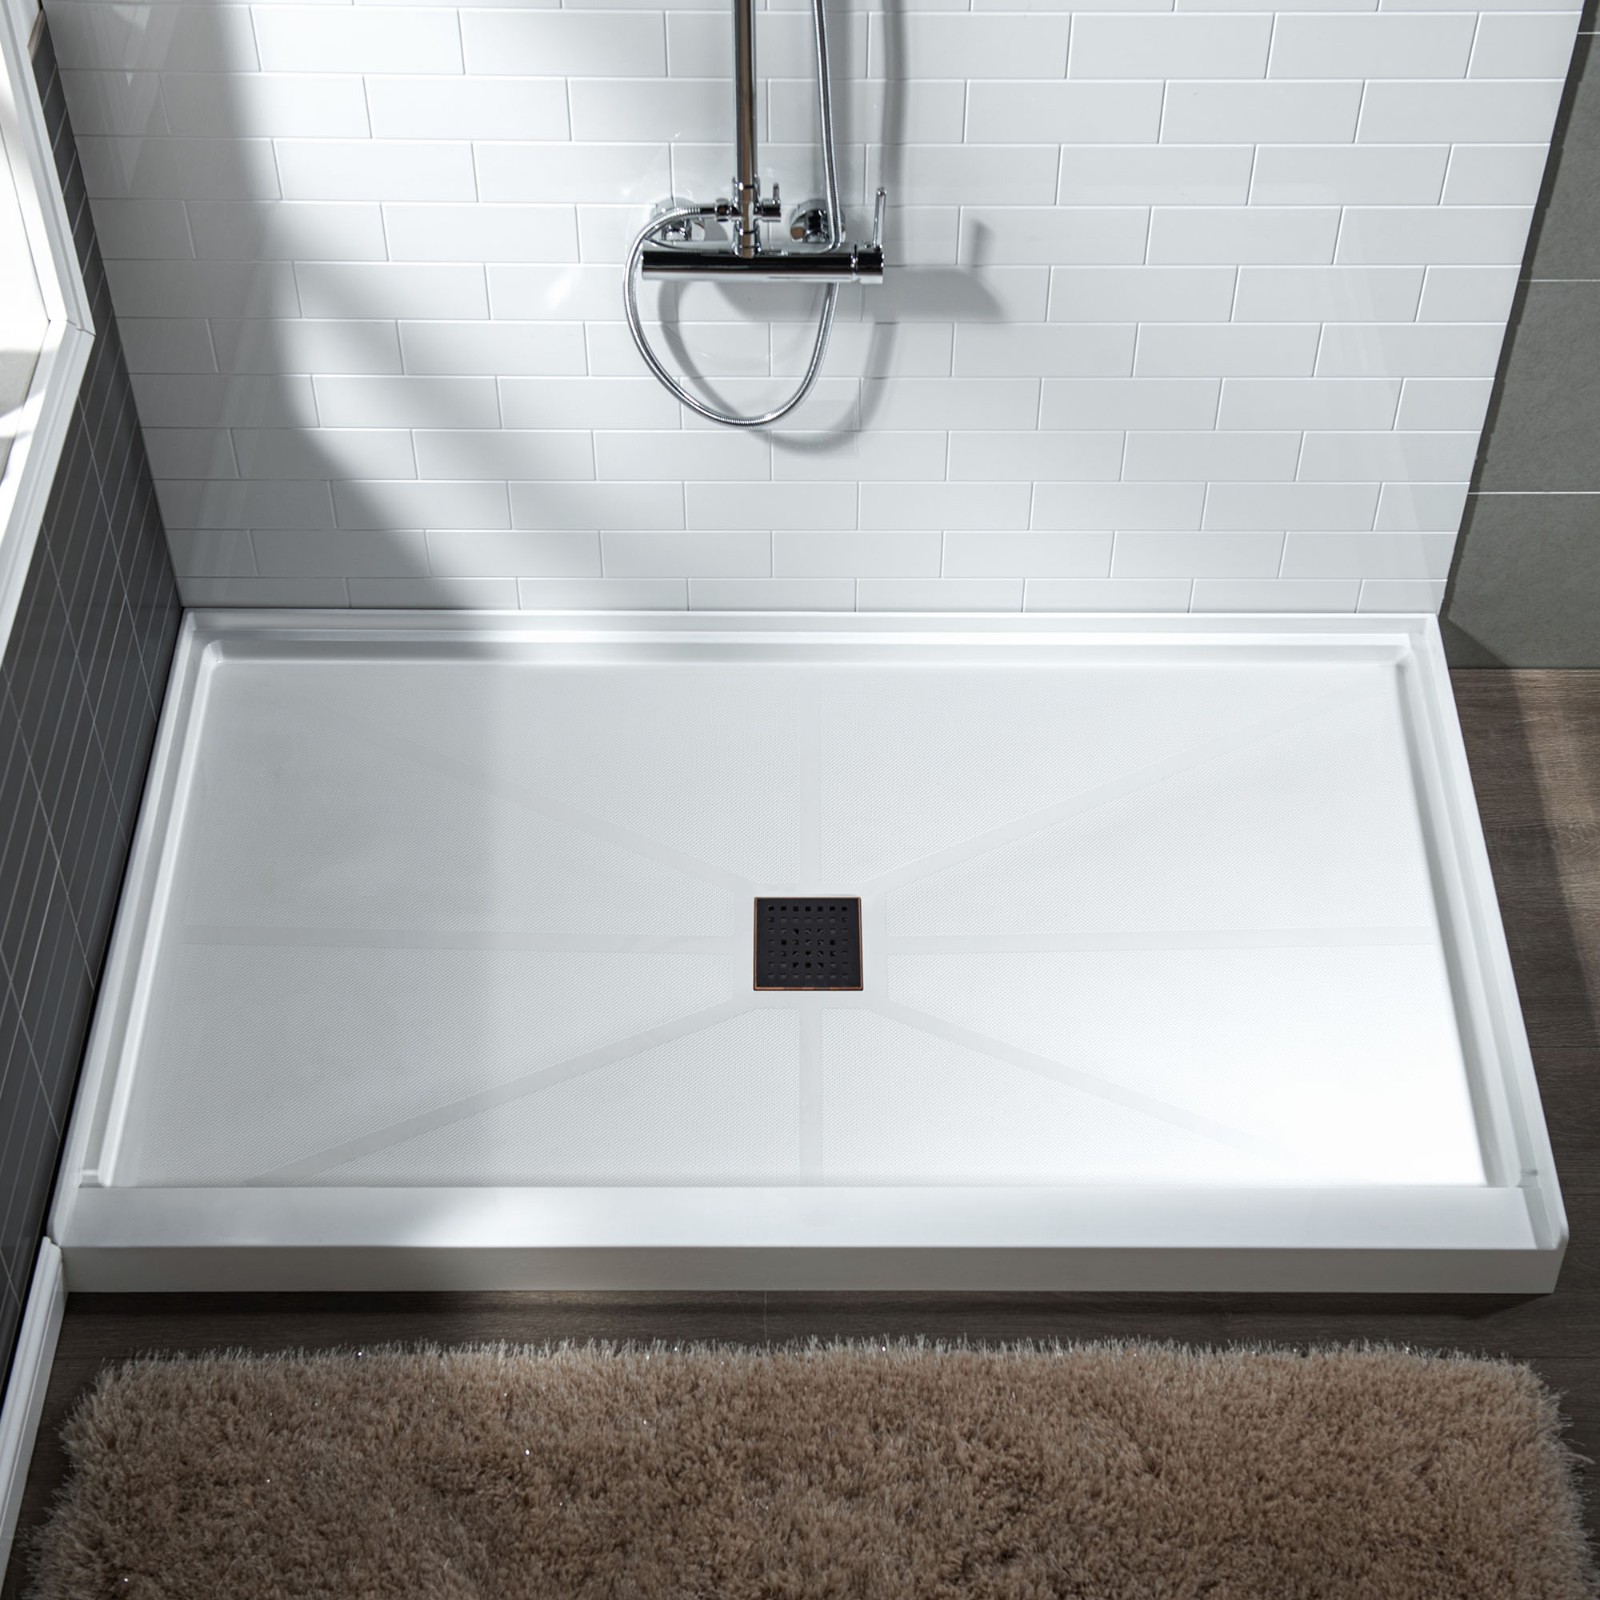  WOODBRIDGE SBR6034-1000C-ORB SolidSurface Shower Base with Recessed Trench Side Including Oil Rubbed Bronze Linear Cover, 60